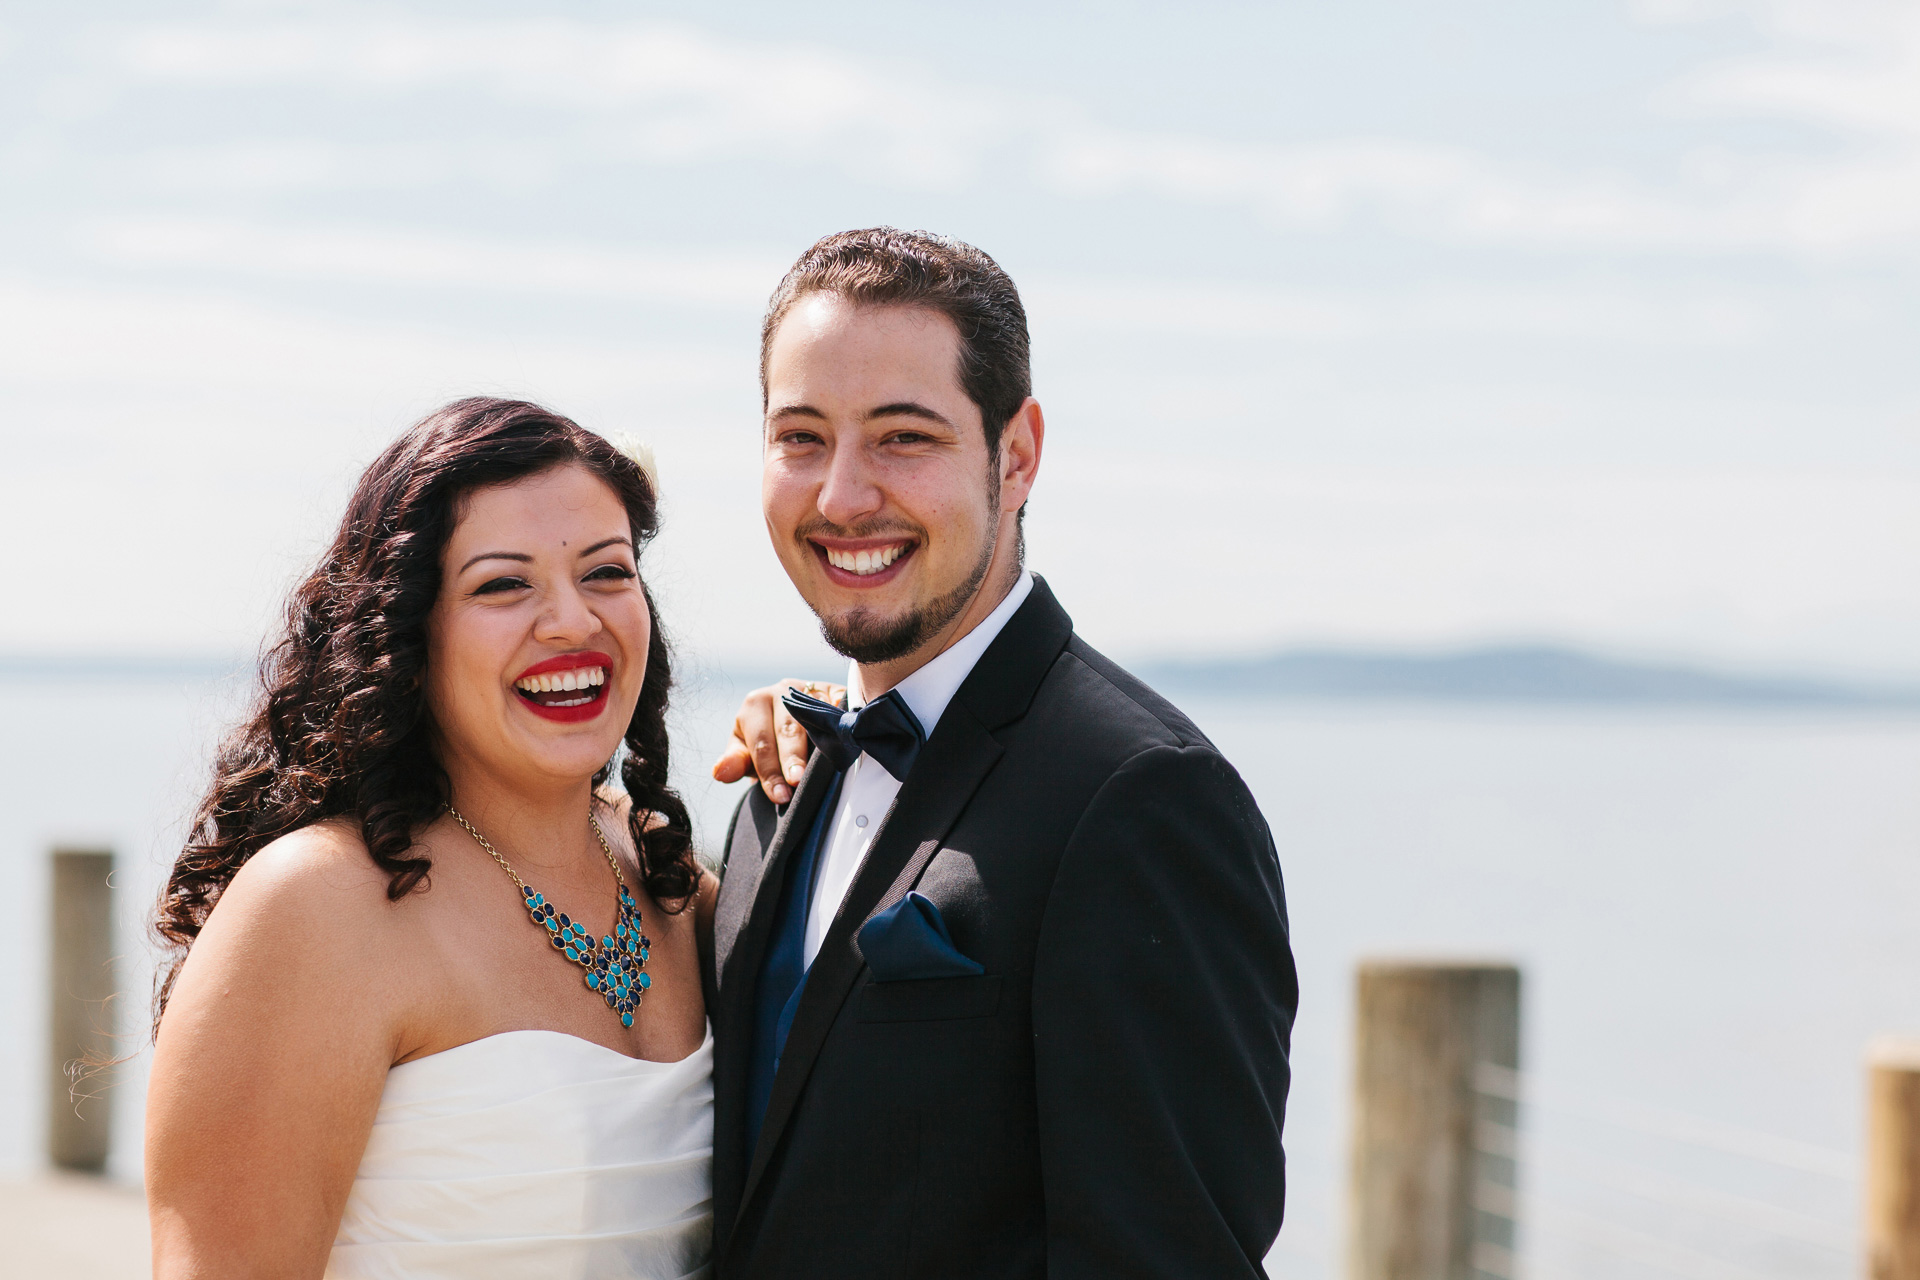 Couple laughing during portraits on Aliki Beach for Seattle wedding during wedding photography coverage